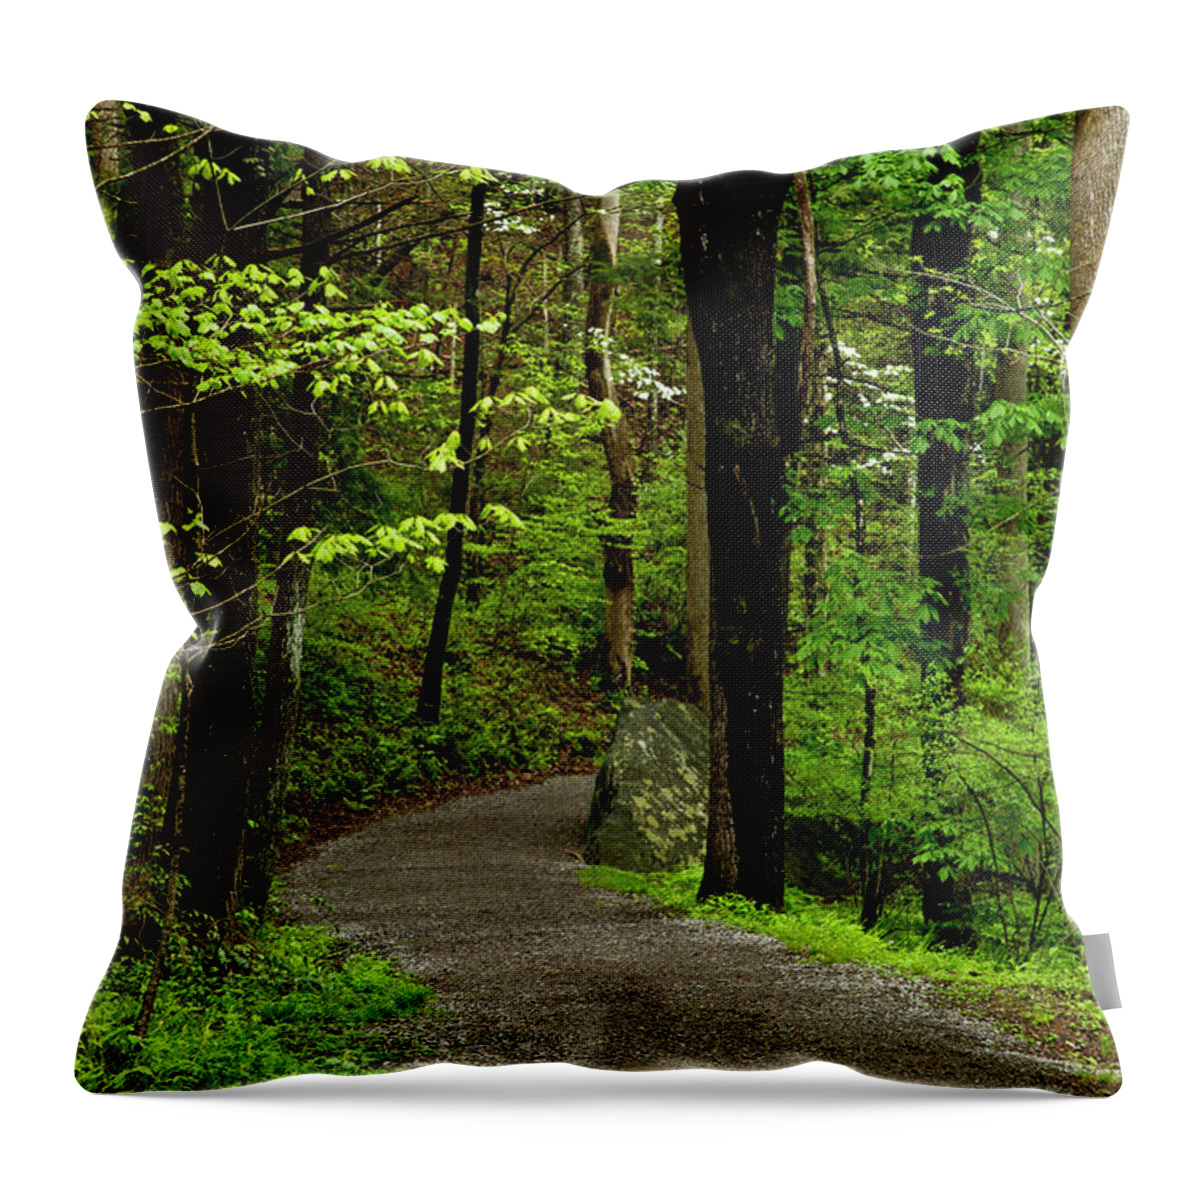 Paths Throw Pillow featuring the photograph Into the Woods by Kathy McClure